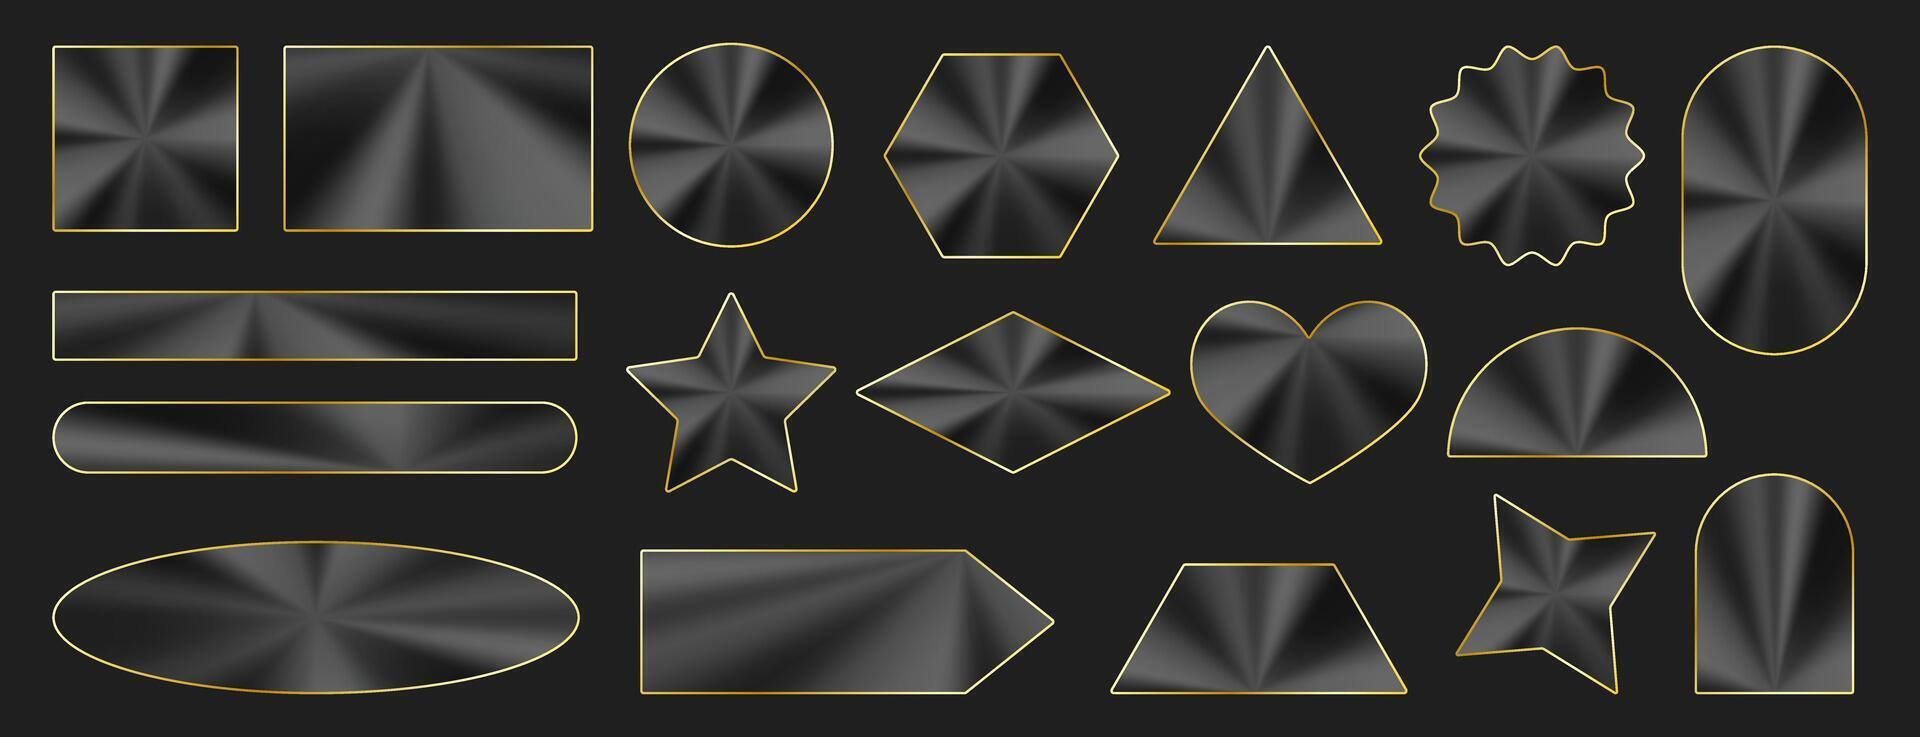 Set of black and gold holographic stickers. Vector various geometric shapes with gold frame. Luxury, vip, premium golden labels. Isolated background